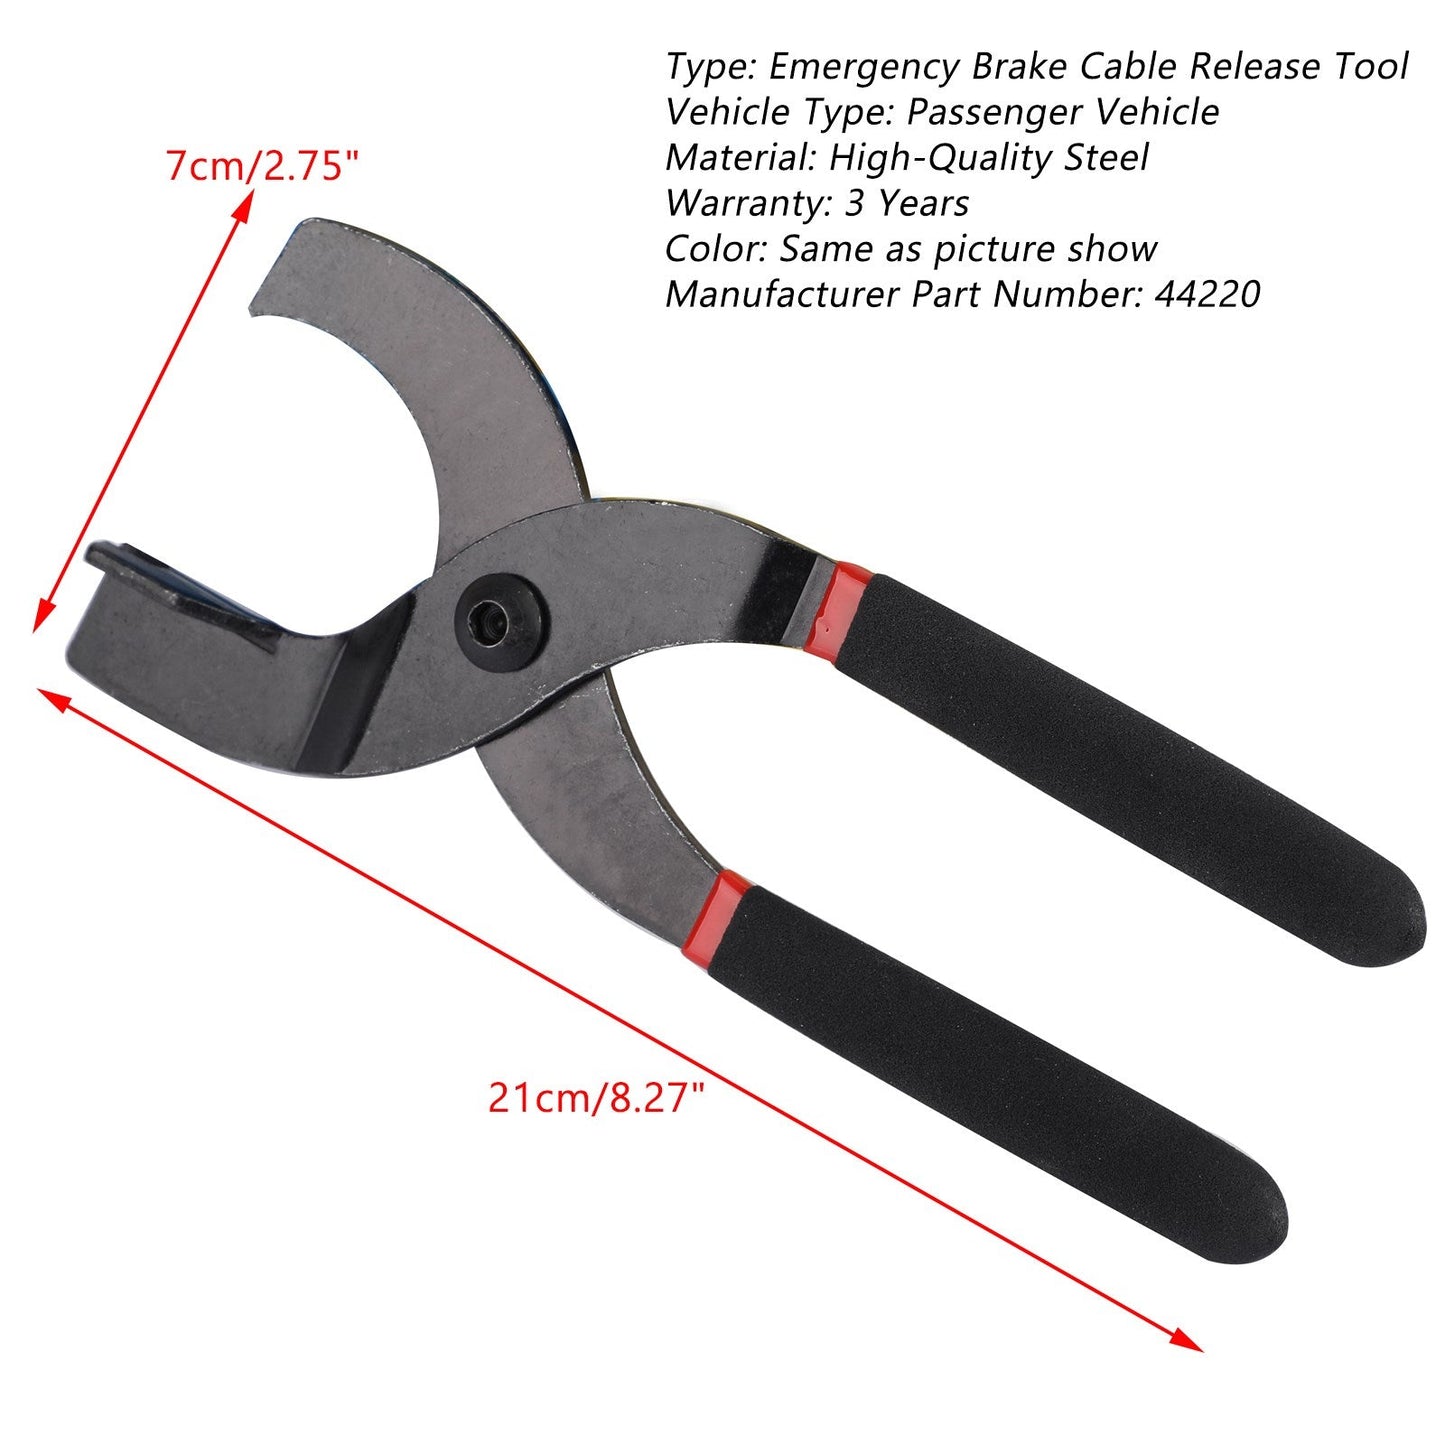 44220 Emergency Brake Cable Release Tool for Servicing Rear Brakes